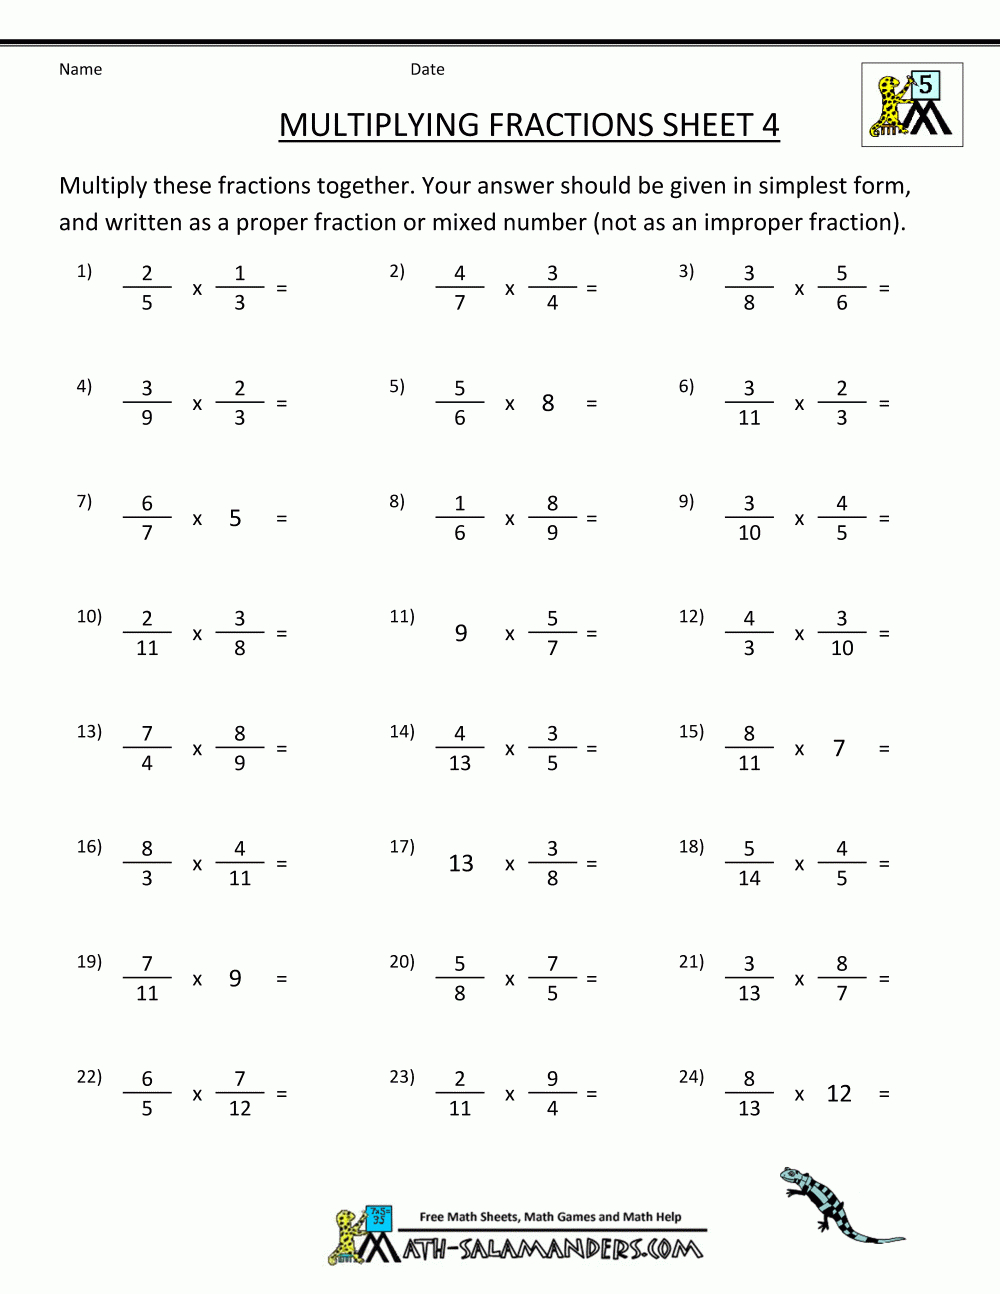 Printable Fraction Worksheets Multiplying Fractions 4 pertaining to Printable Multiplication Of Fractions